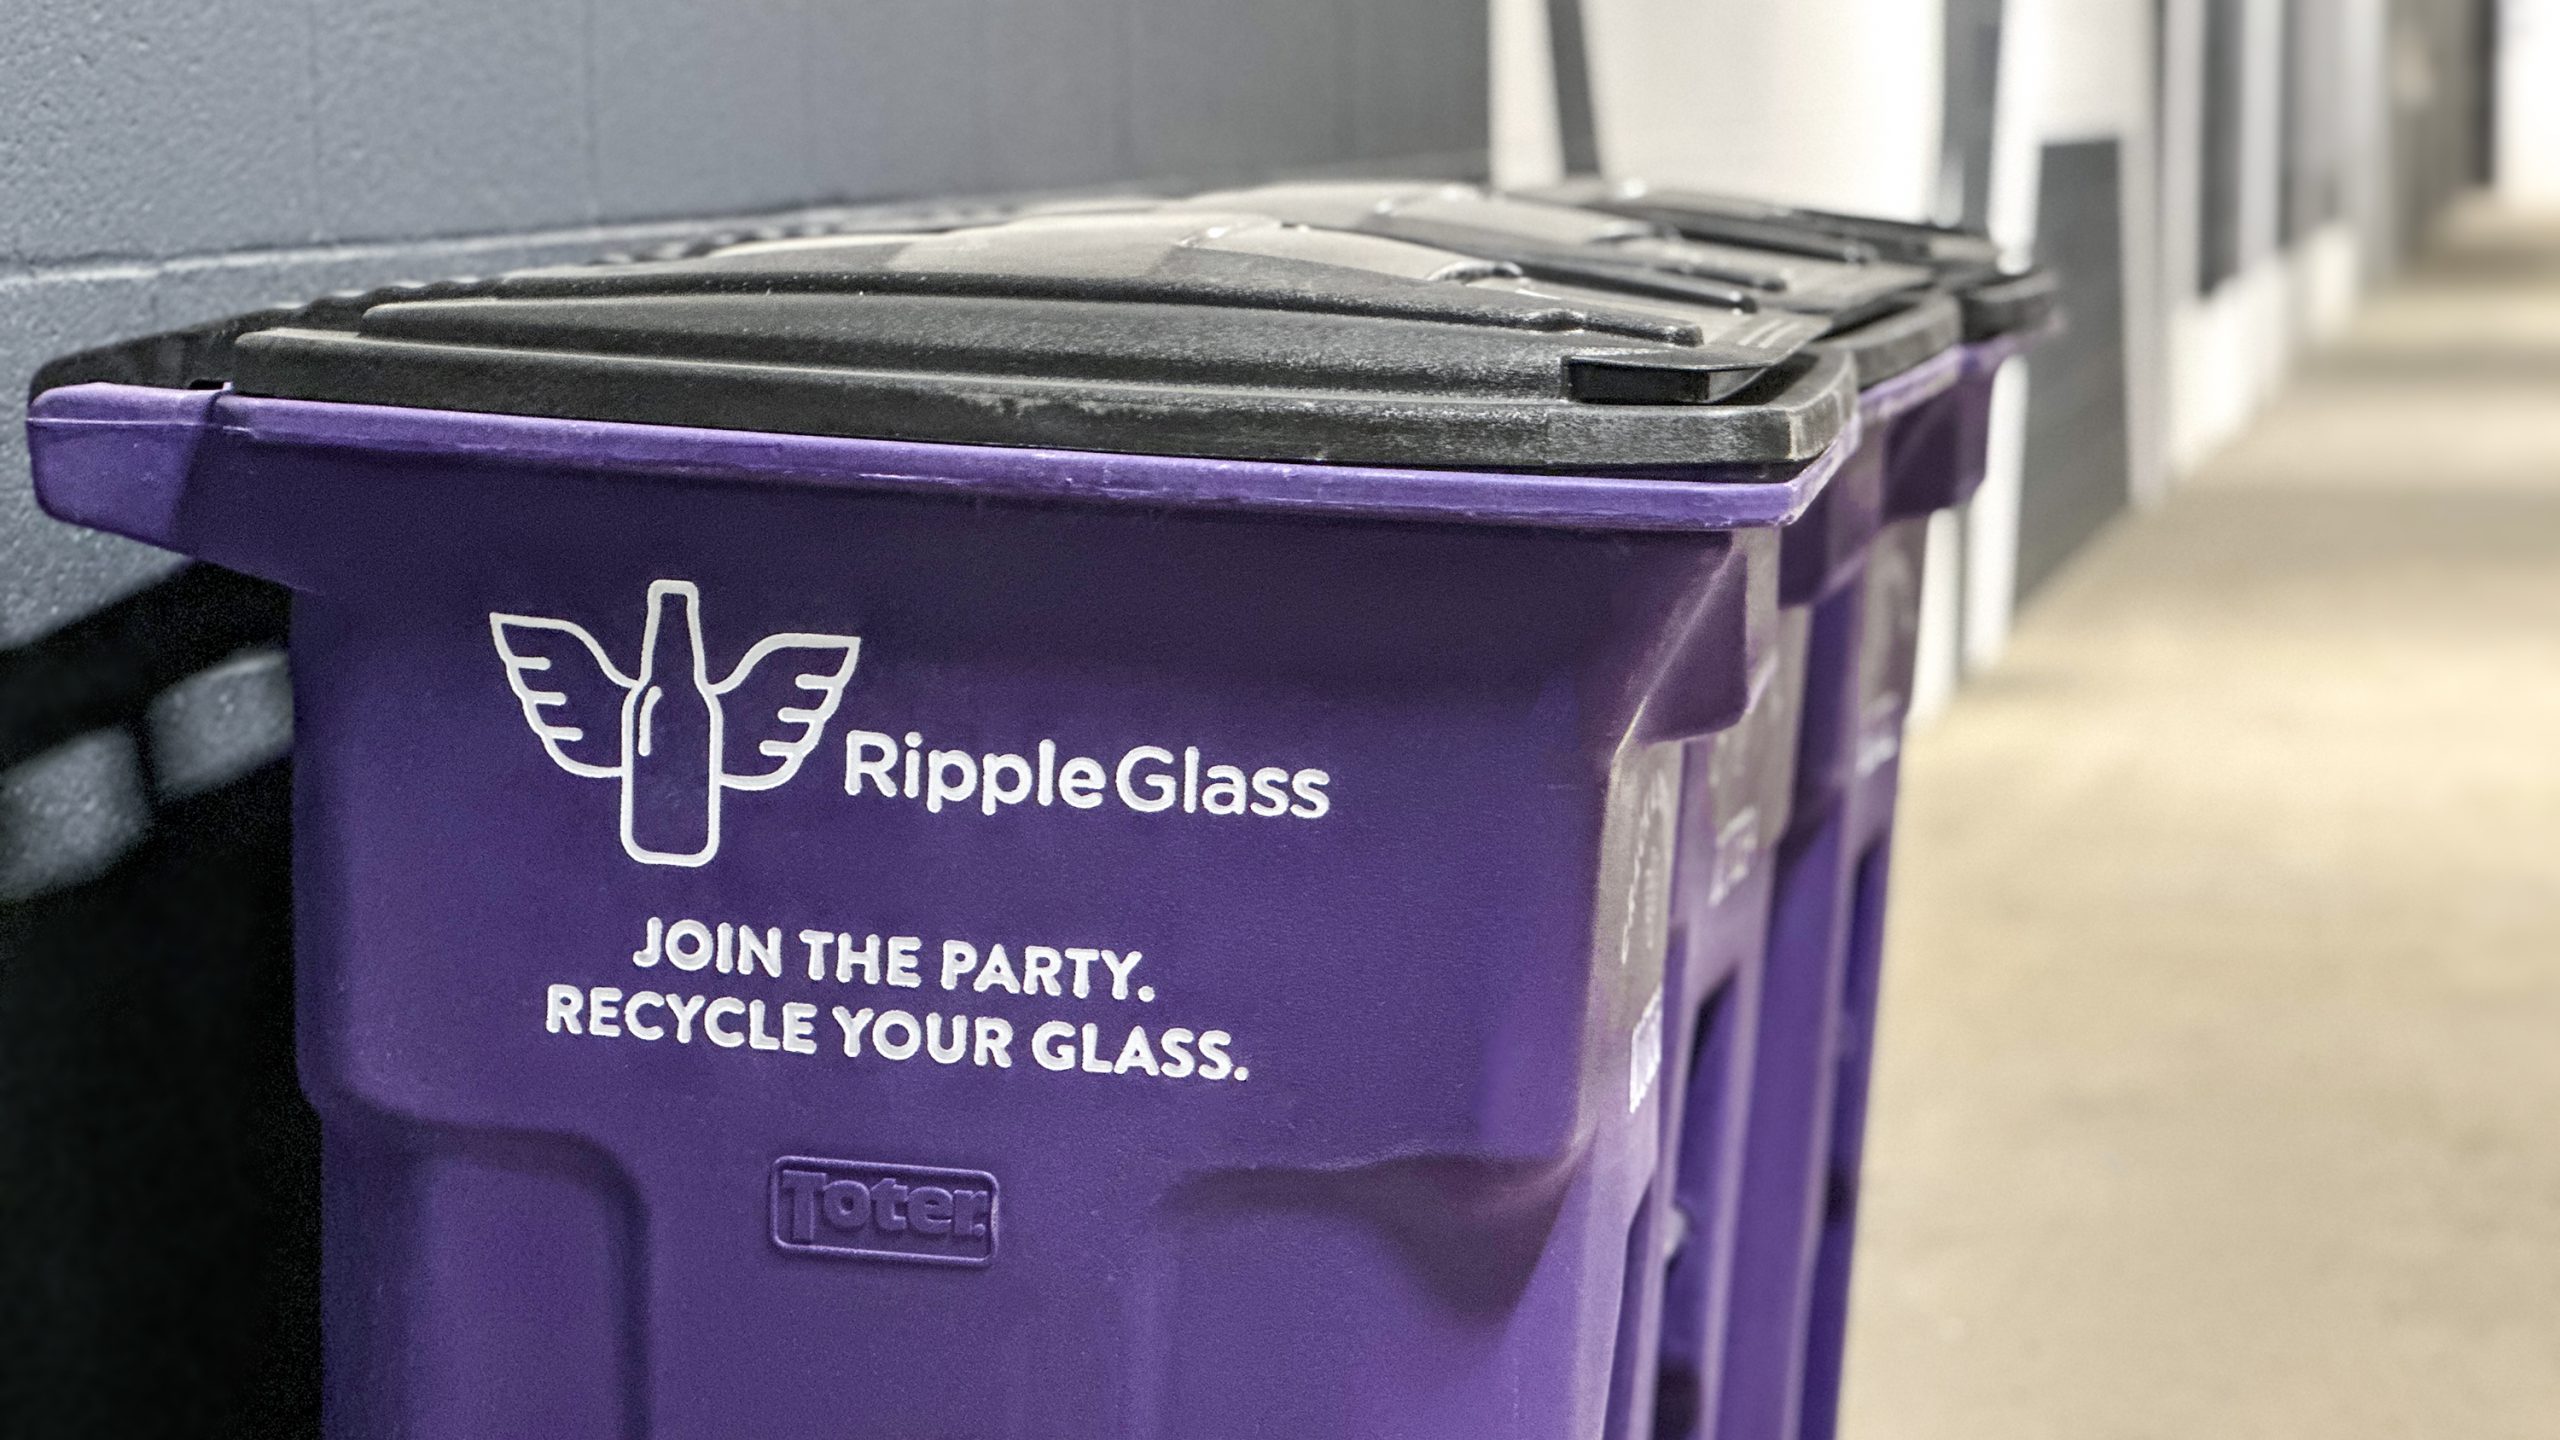 Purple Ripple Glass recycling bins are placed in an apartment parking garage